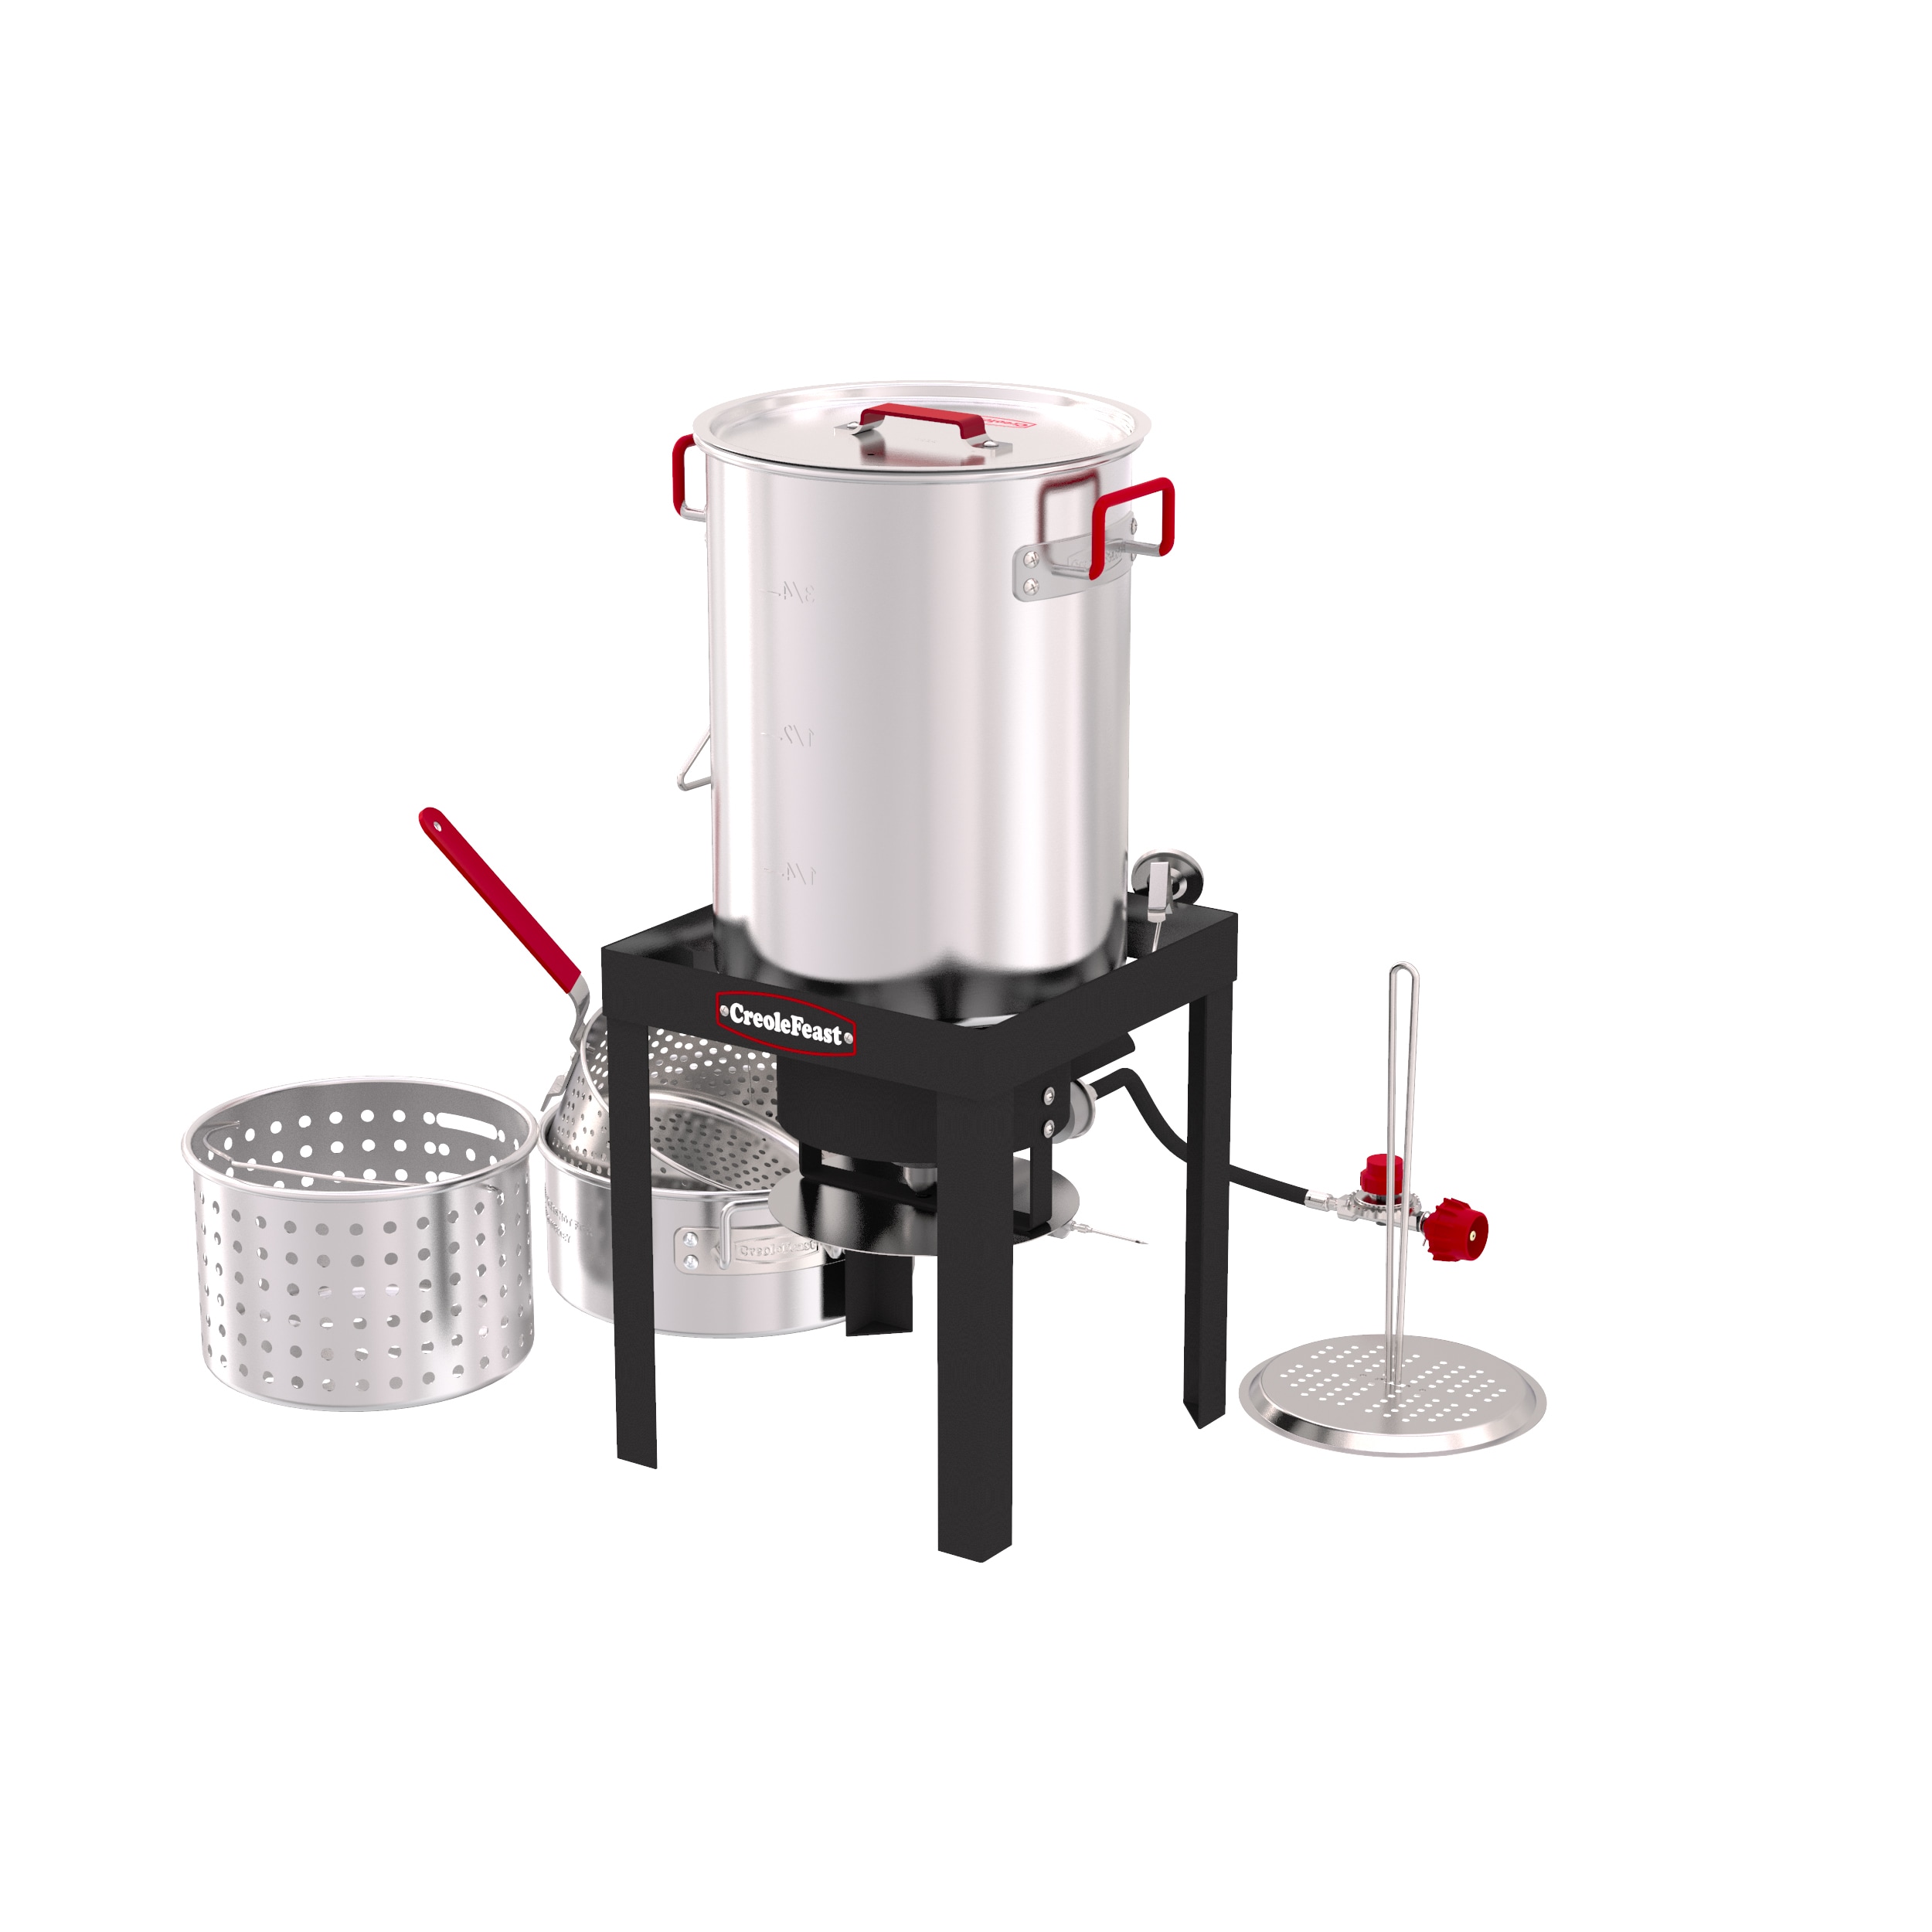 30 Inch Tall Turkey Fryers, Cookers, & Pots at Lowes.com